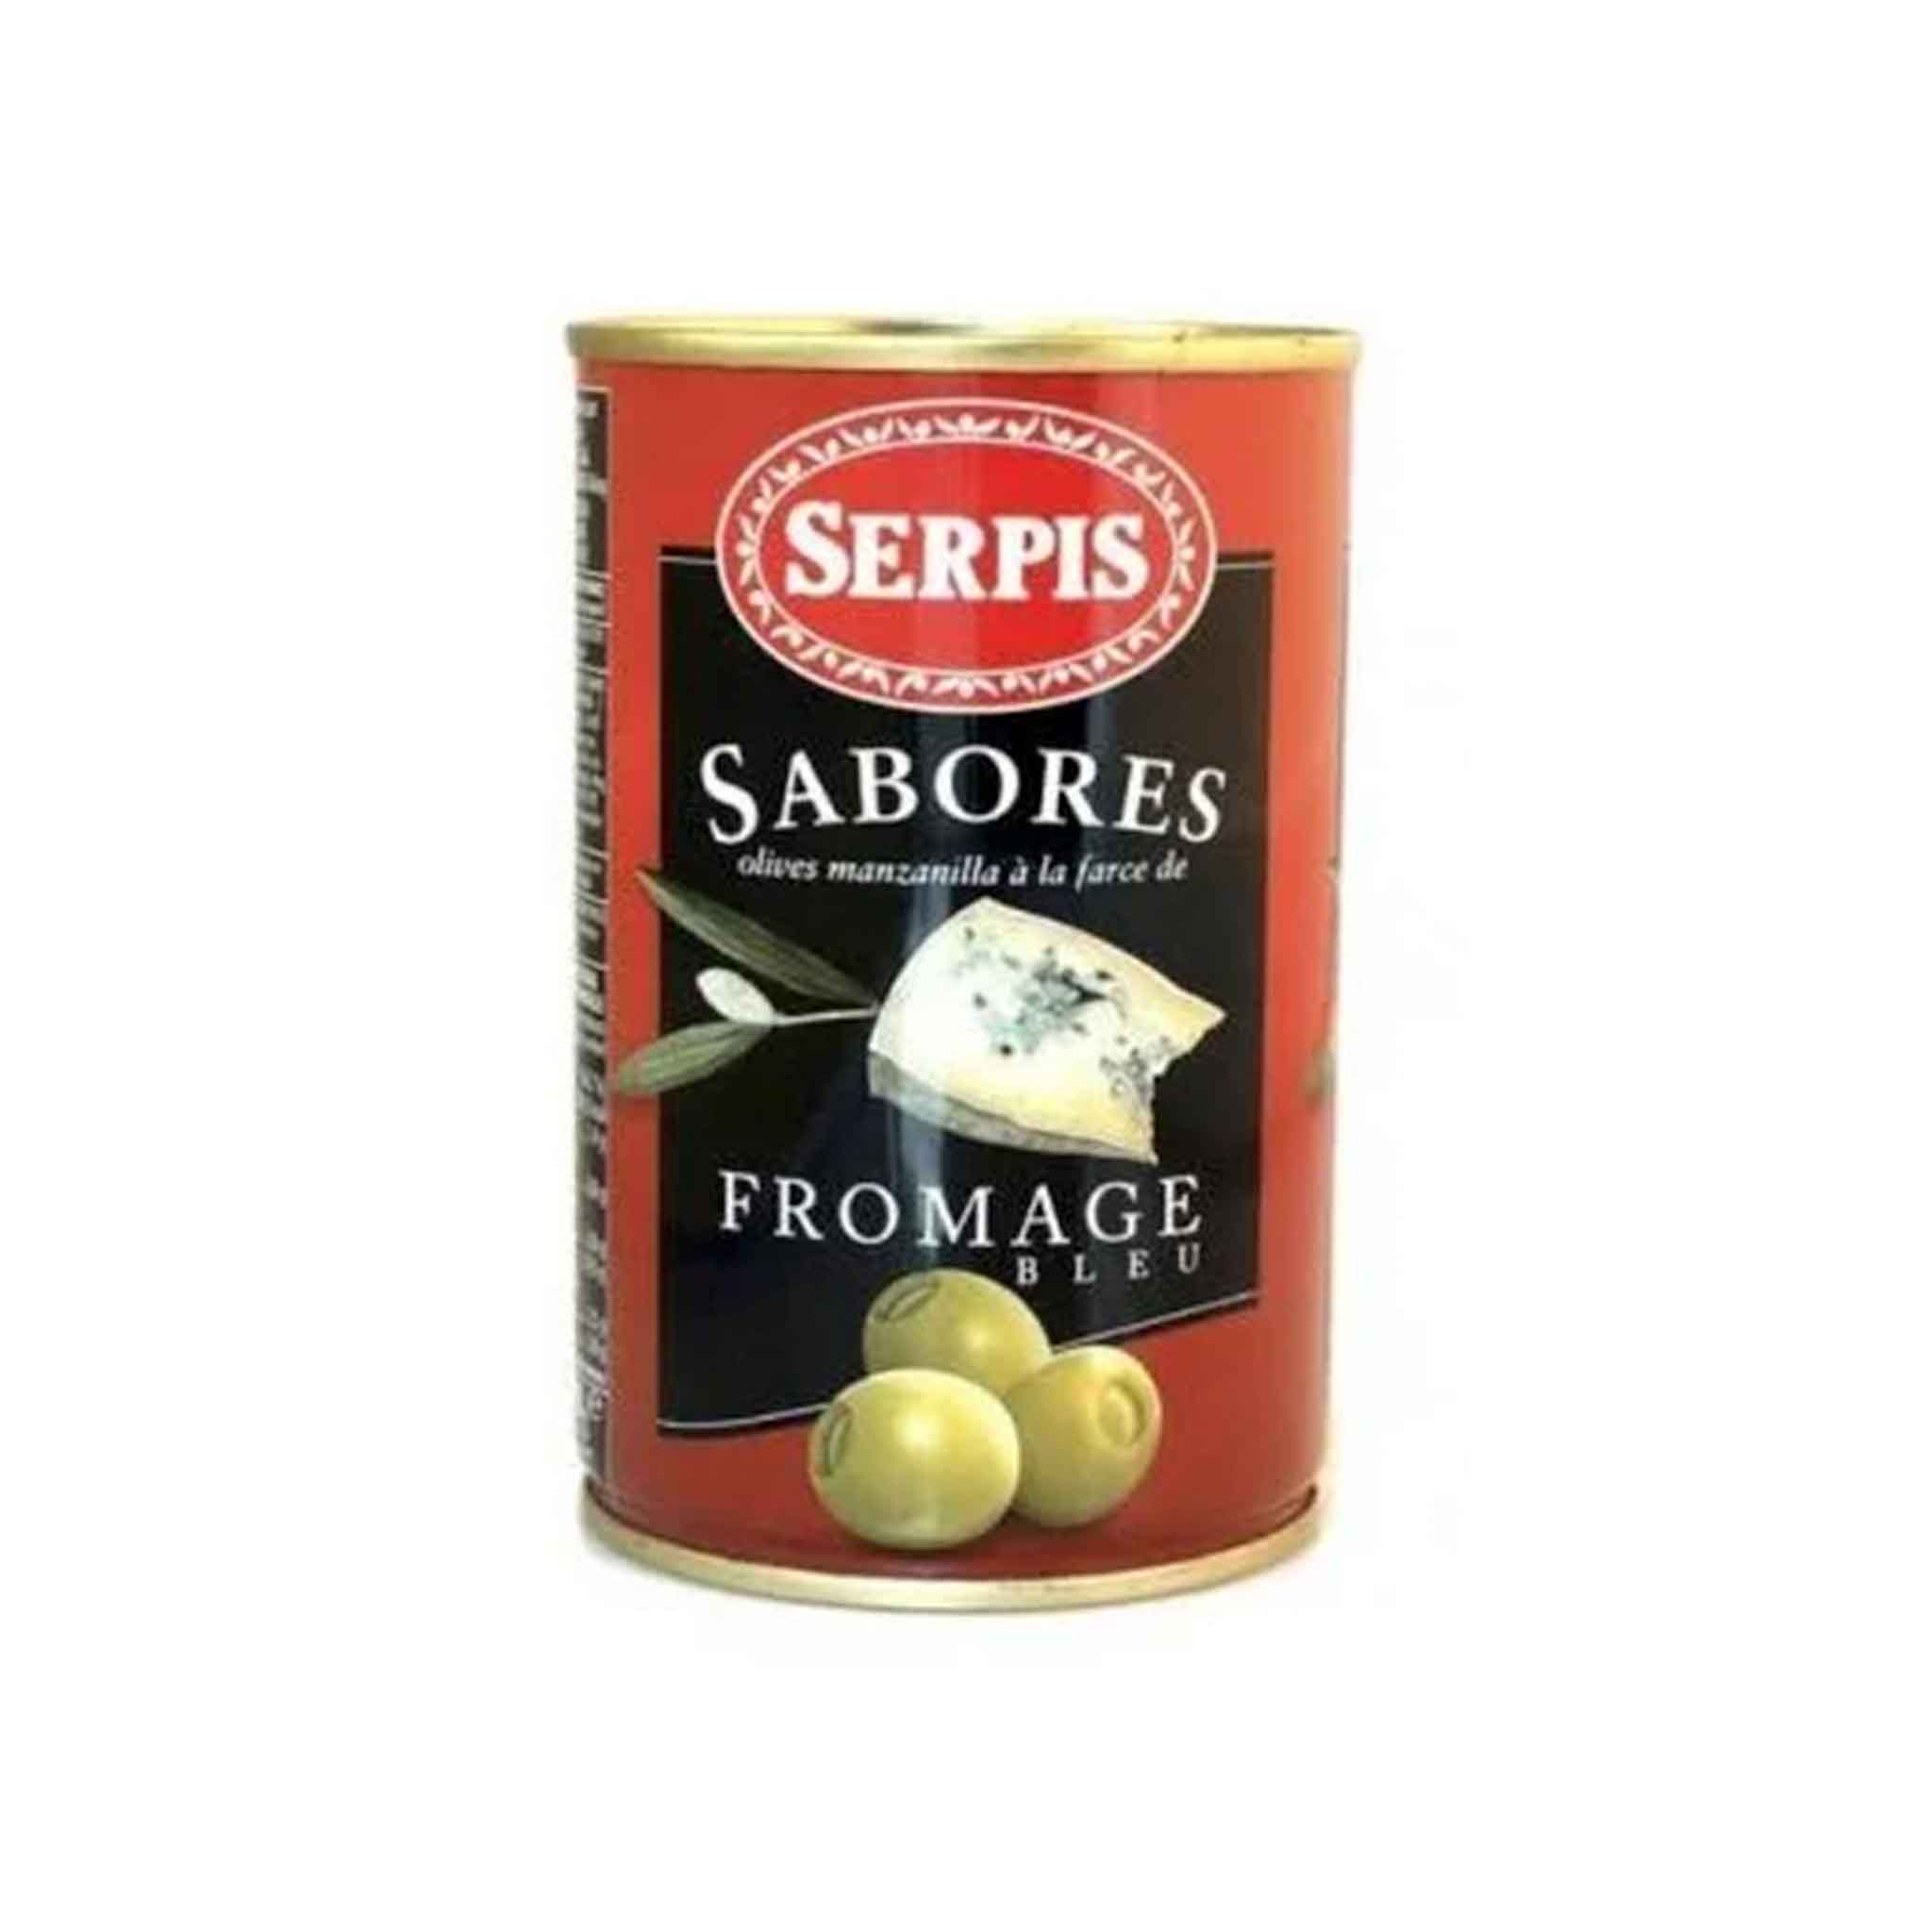 SERPIS BLUE CHEESE STUFFED OLIVES 130g